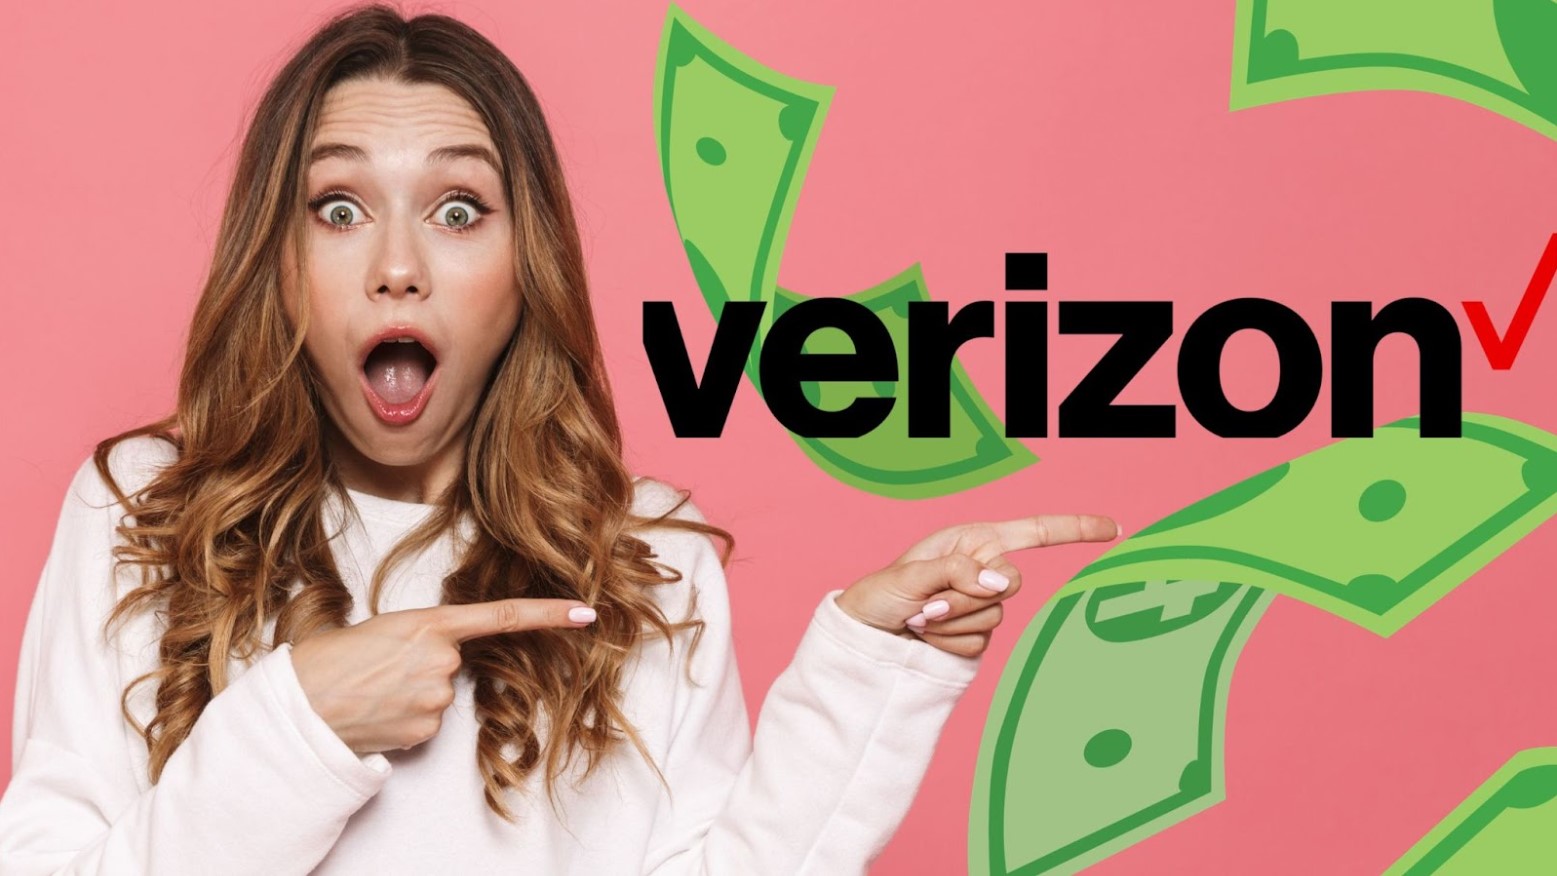 A surprised woman points at the Verizon logo, which is overlaid by money in the background.